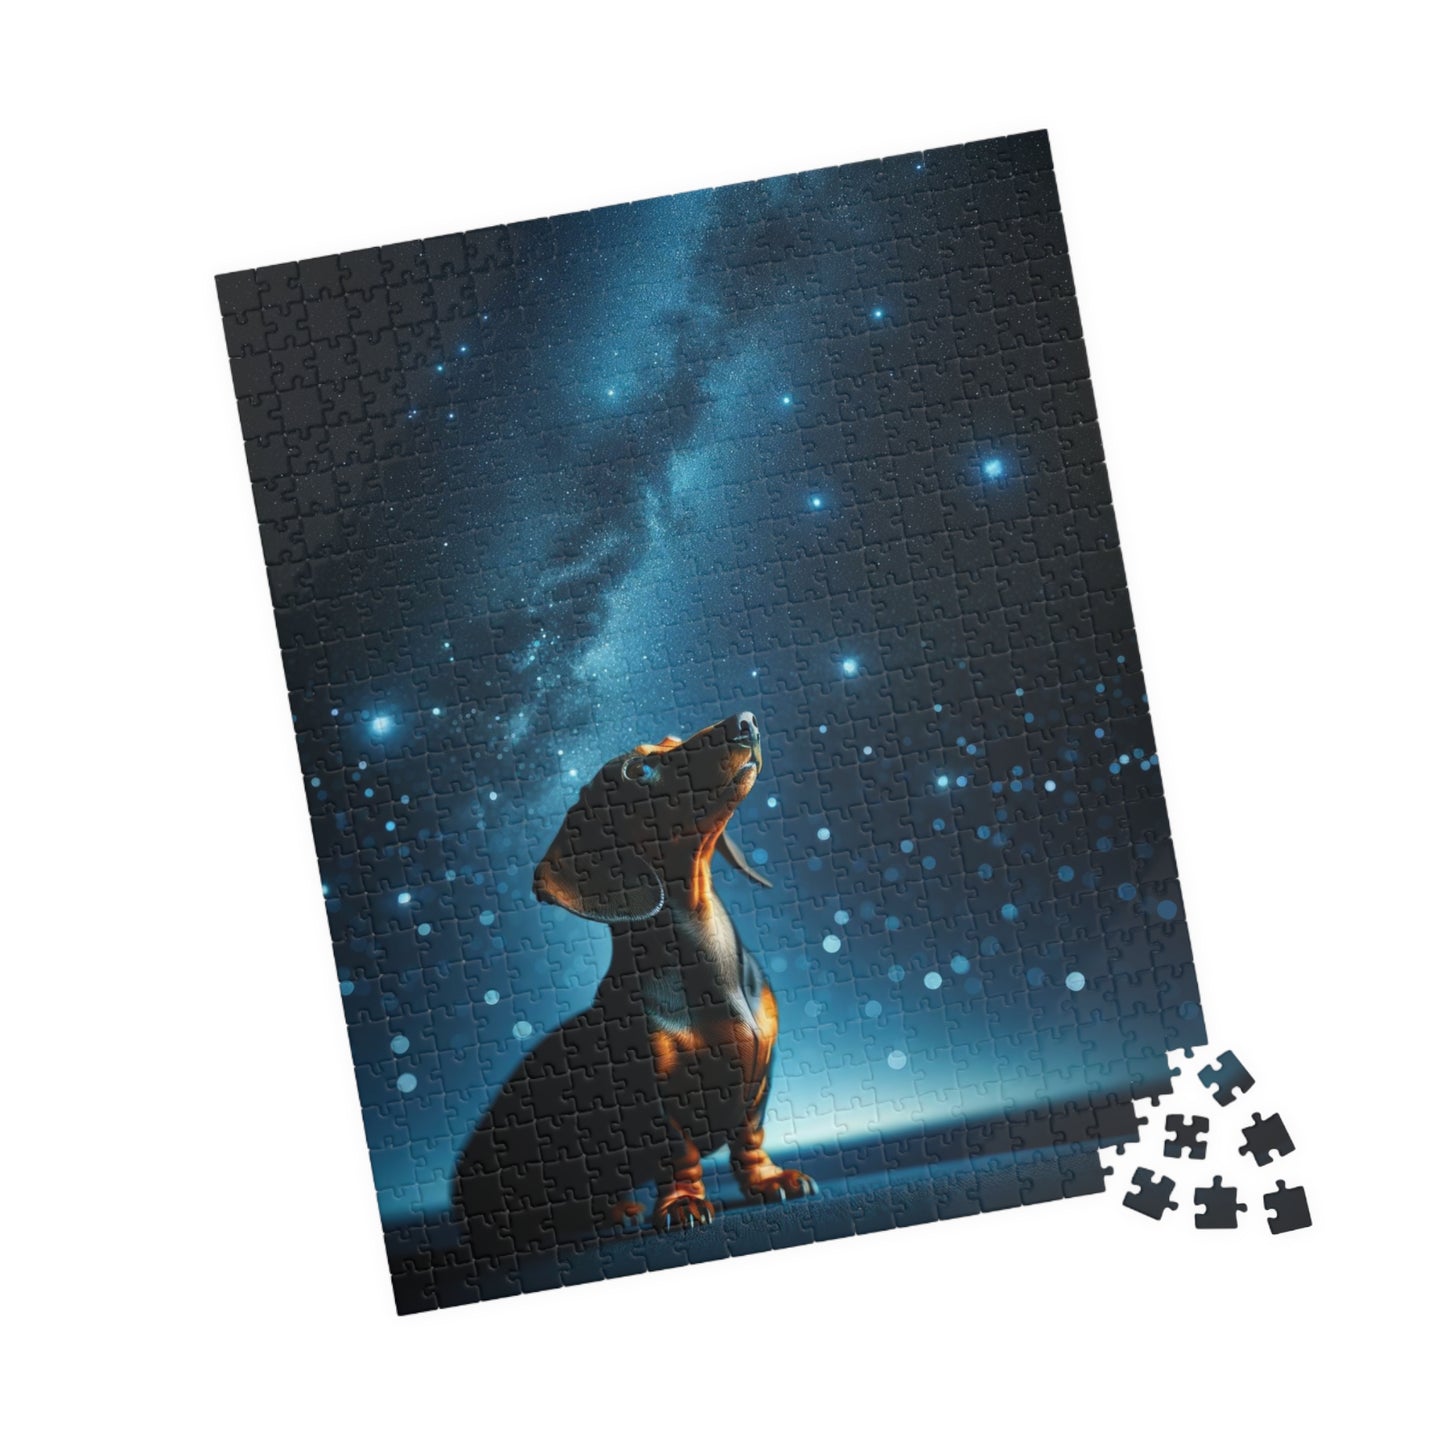 Stargazer Dachshund Jigsaw Puzzle - Cosmic Canine Collection - Glossy Finish, Multiple Pieces Options 110, 252, 520, 1014